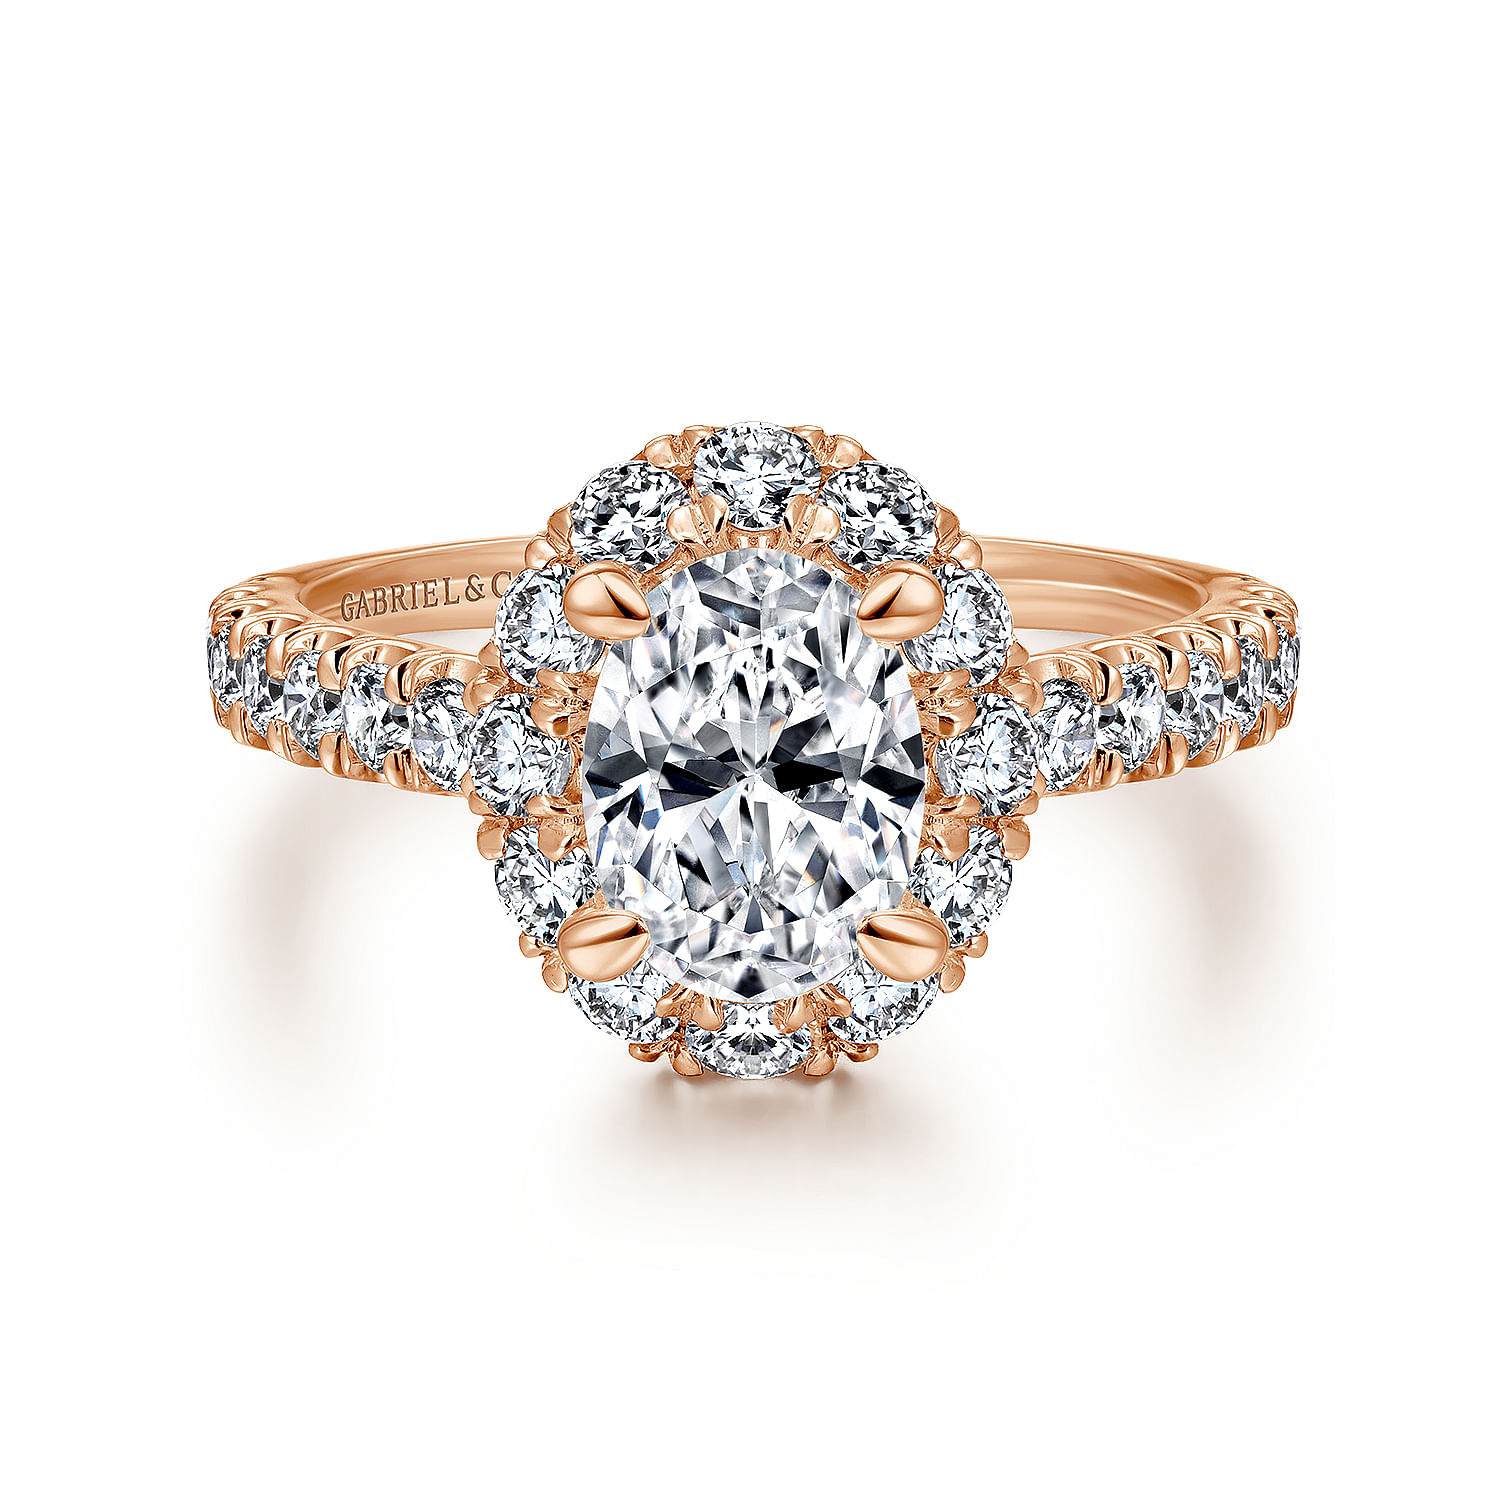 Sutton - 14K Rose Gold Oval Halo Diamond Engagement Ring